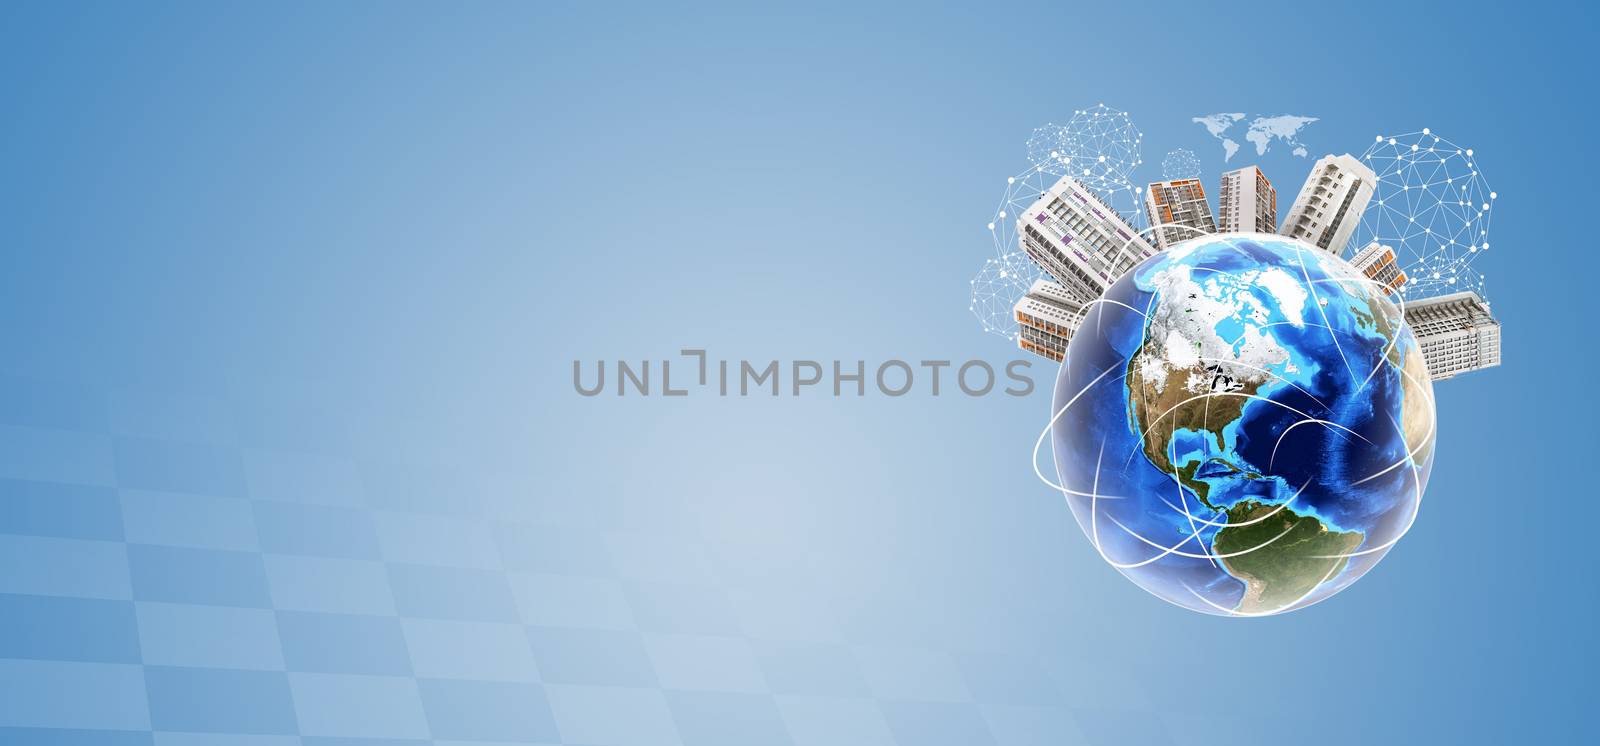 Earth with cityscape and molecule model on blue background. Elements of this image furnished by NASA